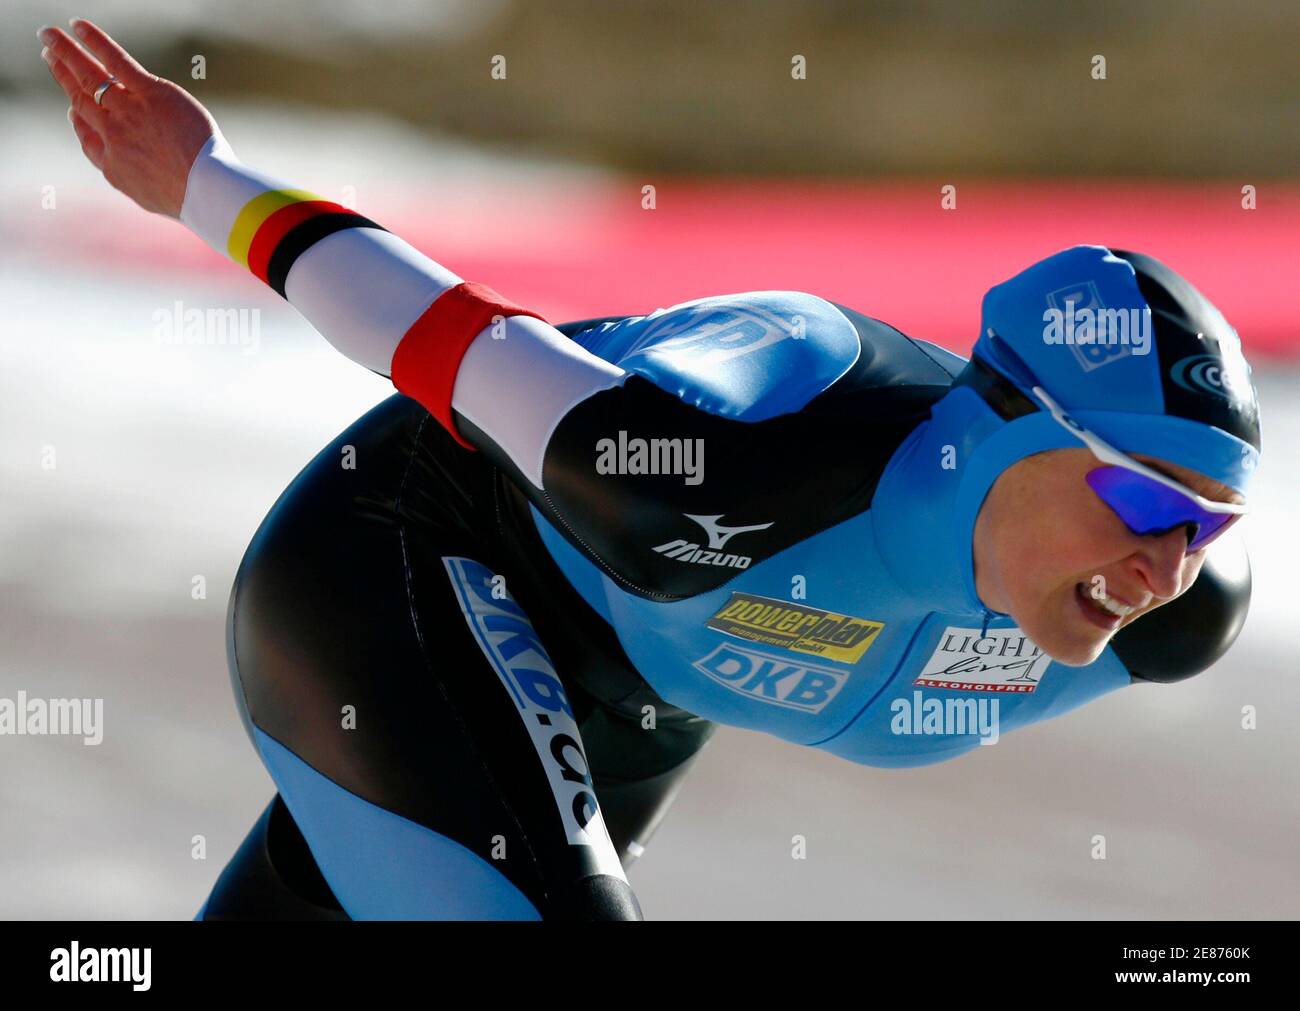 Germany's Claudia Pechstein participates in the women's 1500 meters  European Speed Skating Championships race at the outdoor Ritten Arena in  Collalbo, Italy January 13, 2007. REUTERS/Jerry Lampen (ITALY Stock Photo -  Alamy